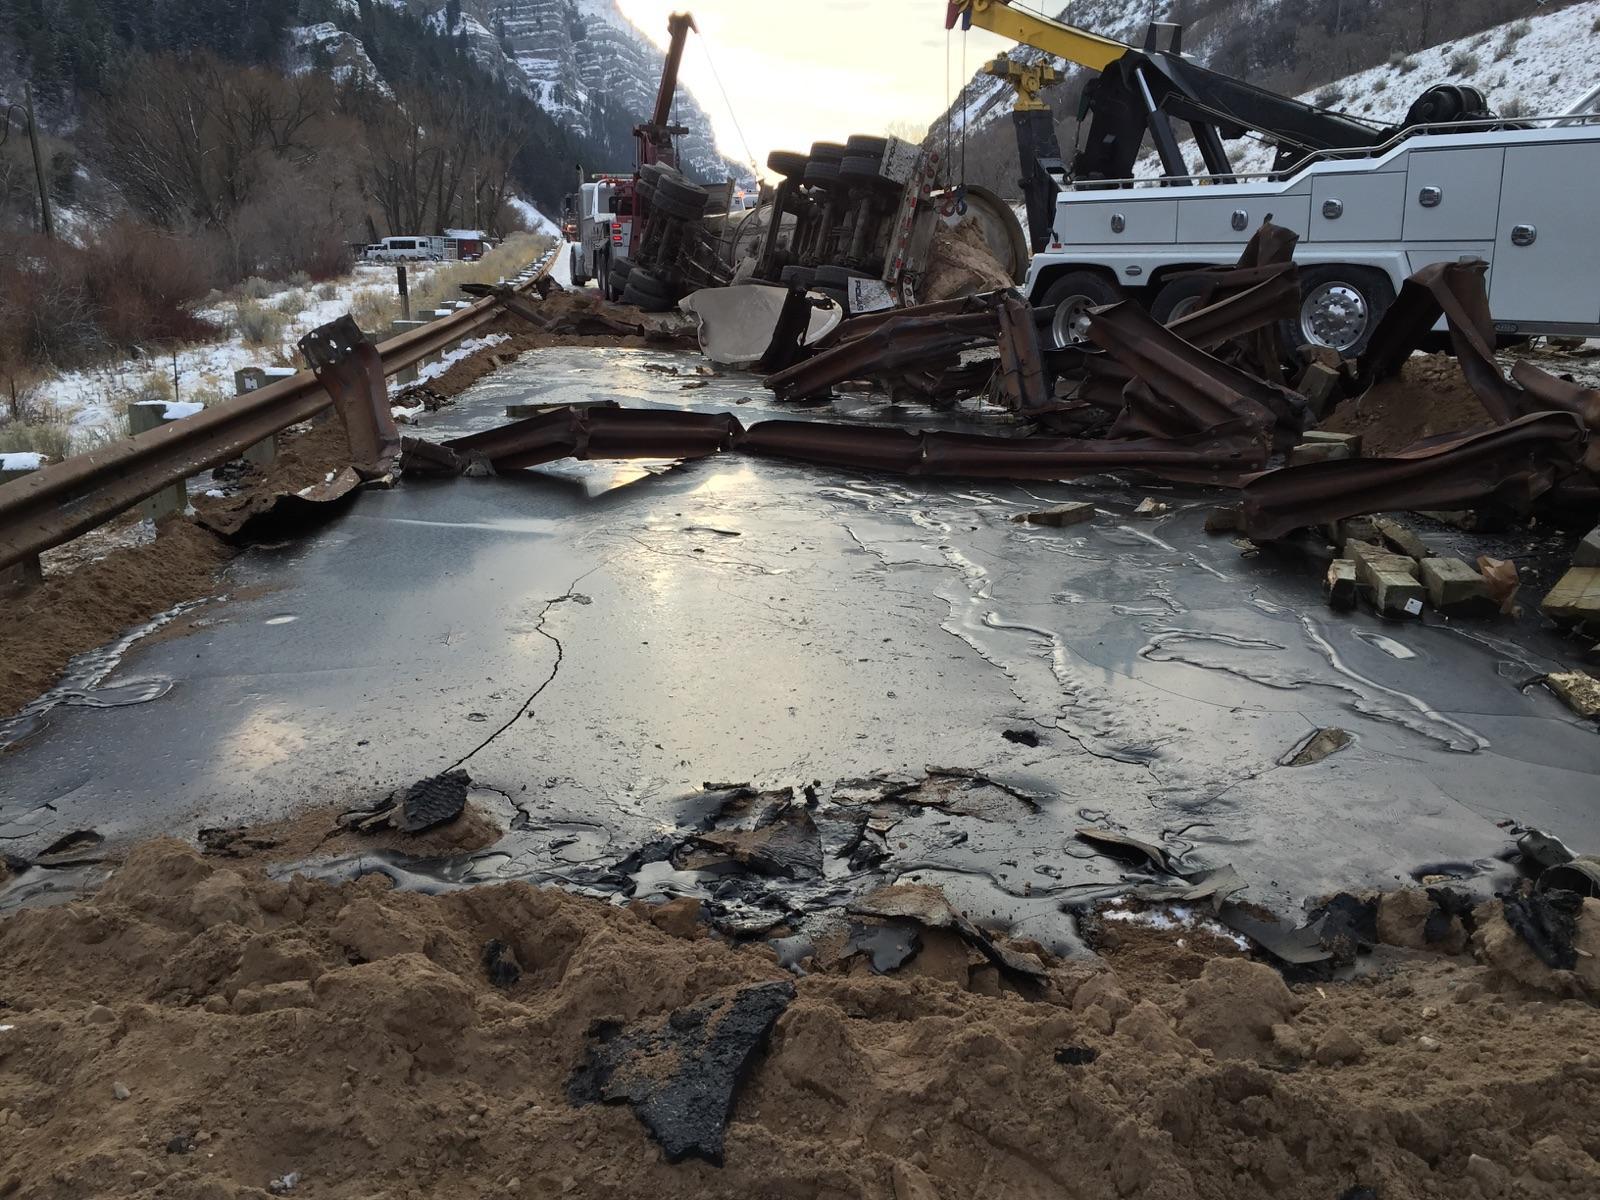 Crude oil spill on Highway 189 in Provo Canyon. 